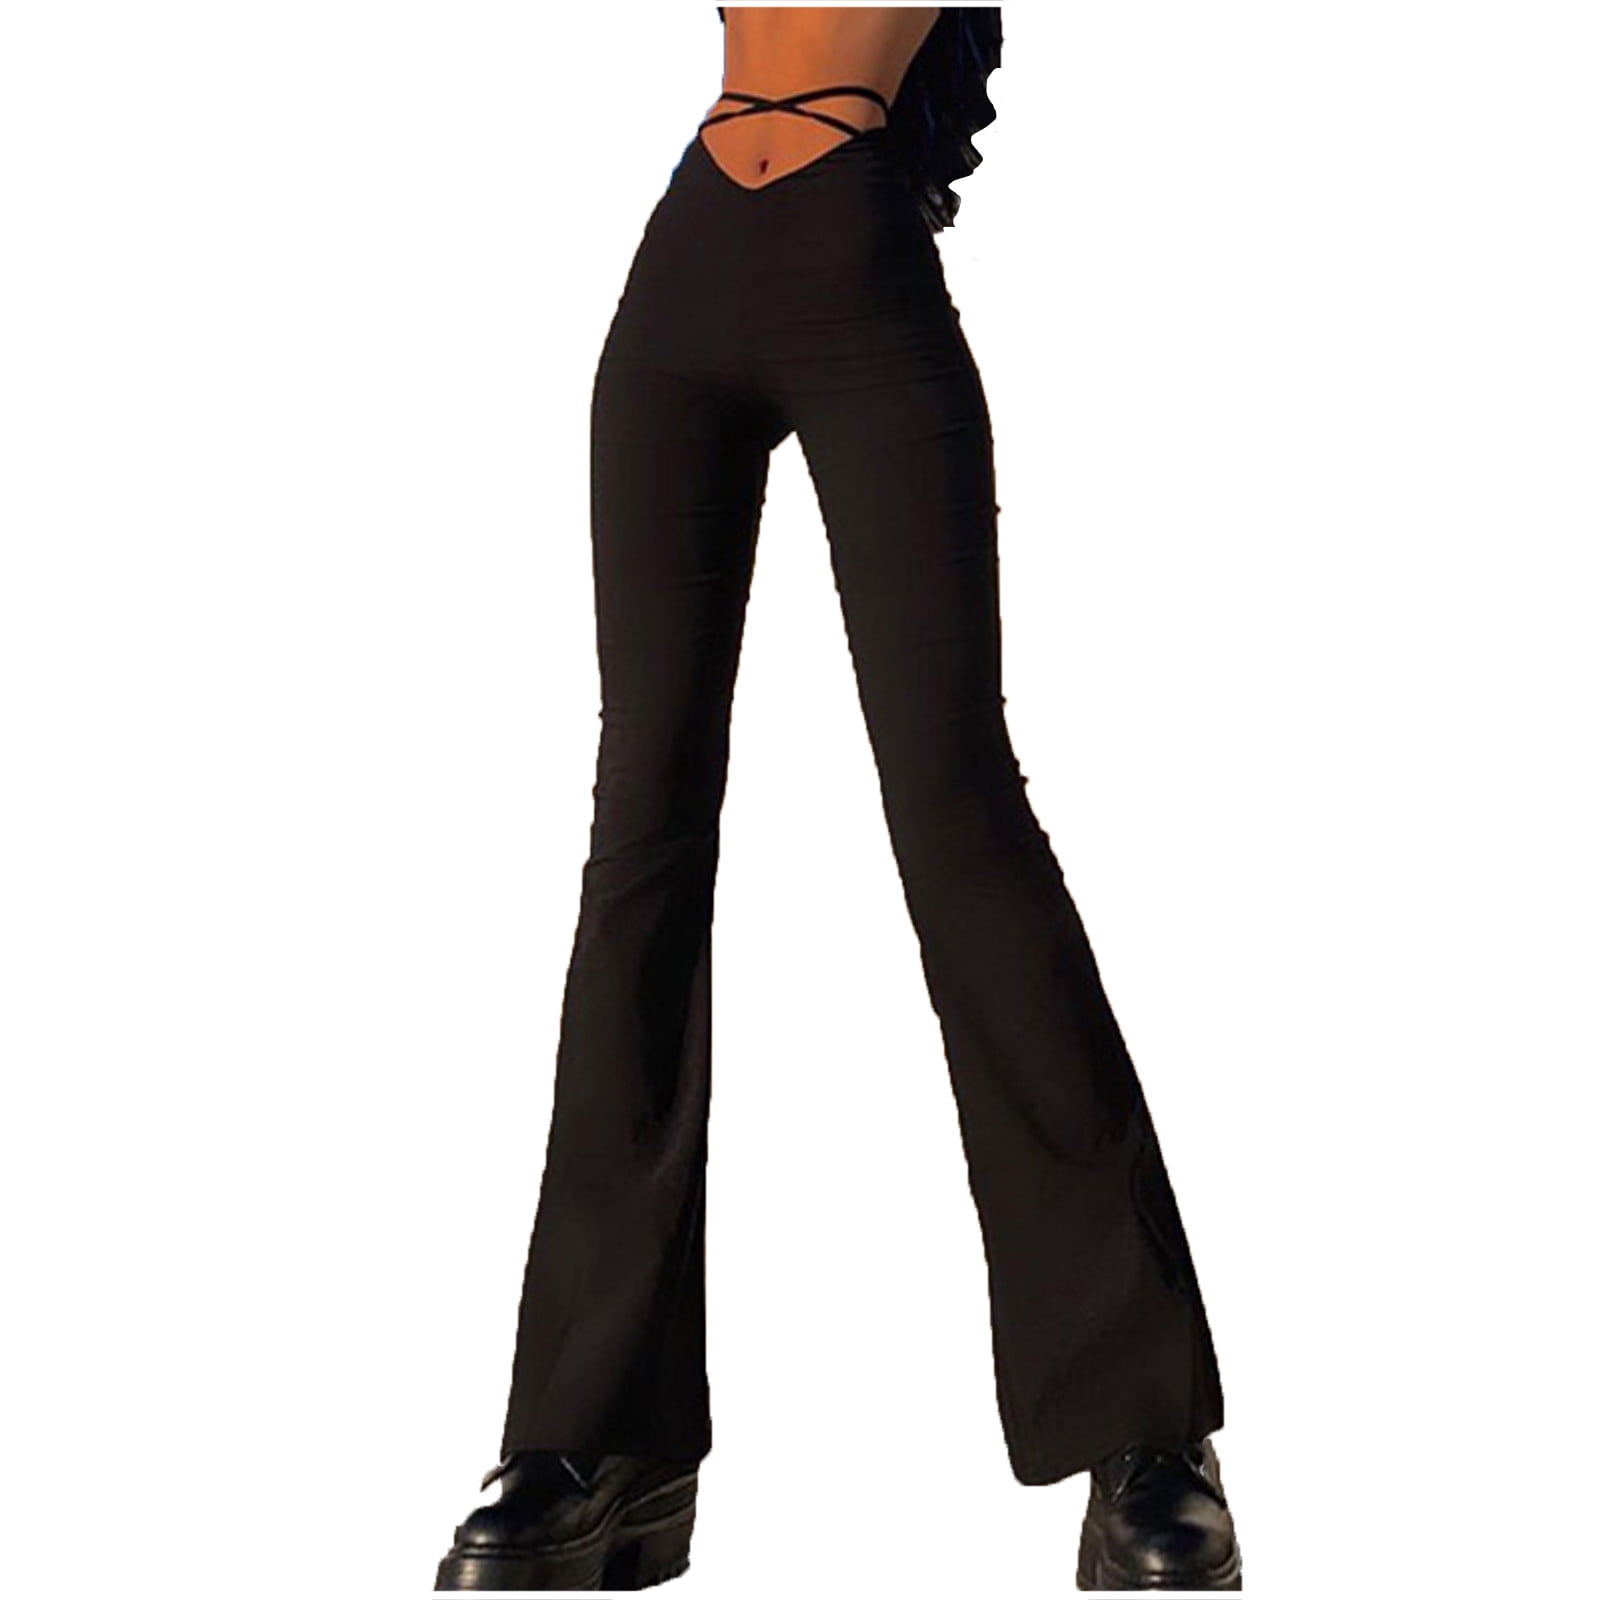 Bootcut Pants Women Plus Size Korean Style Flared Pants High Waist Trousers  Elasticlong Pants For Work Casual All Match Pants